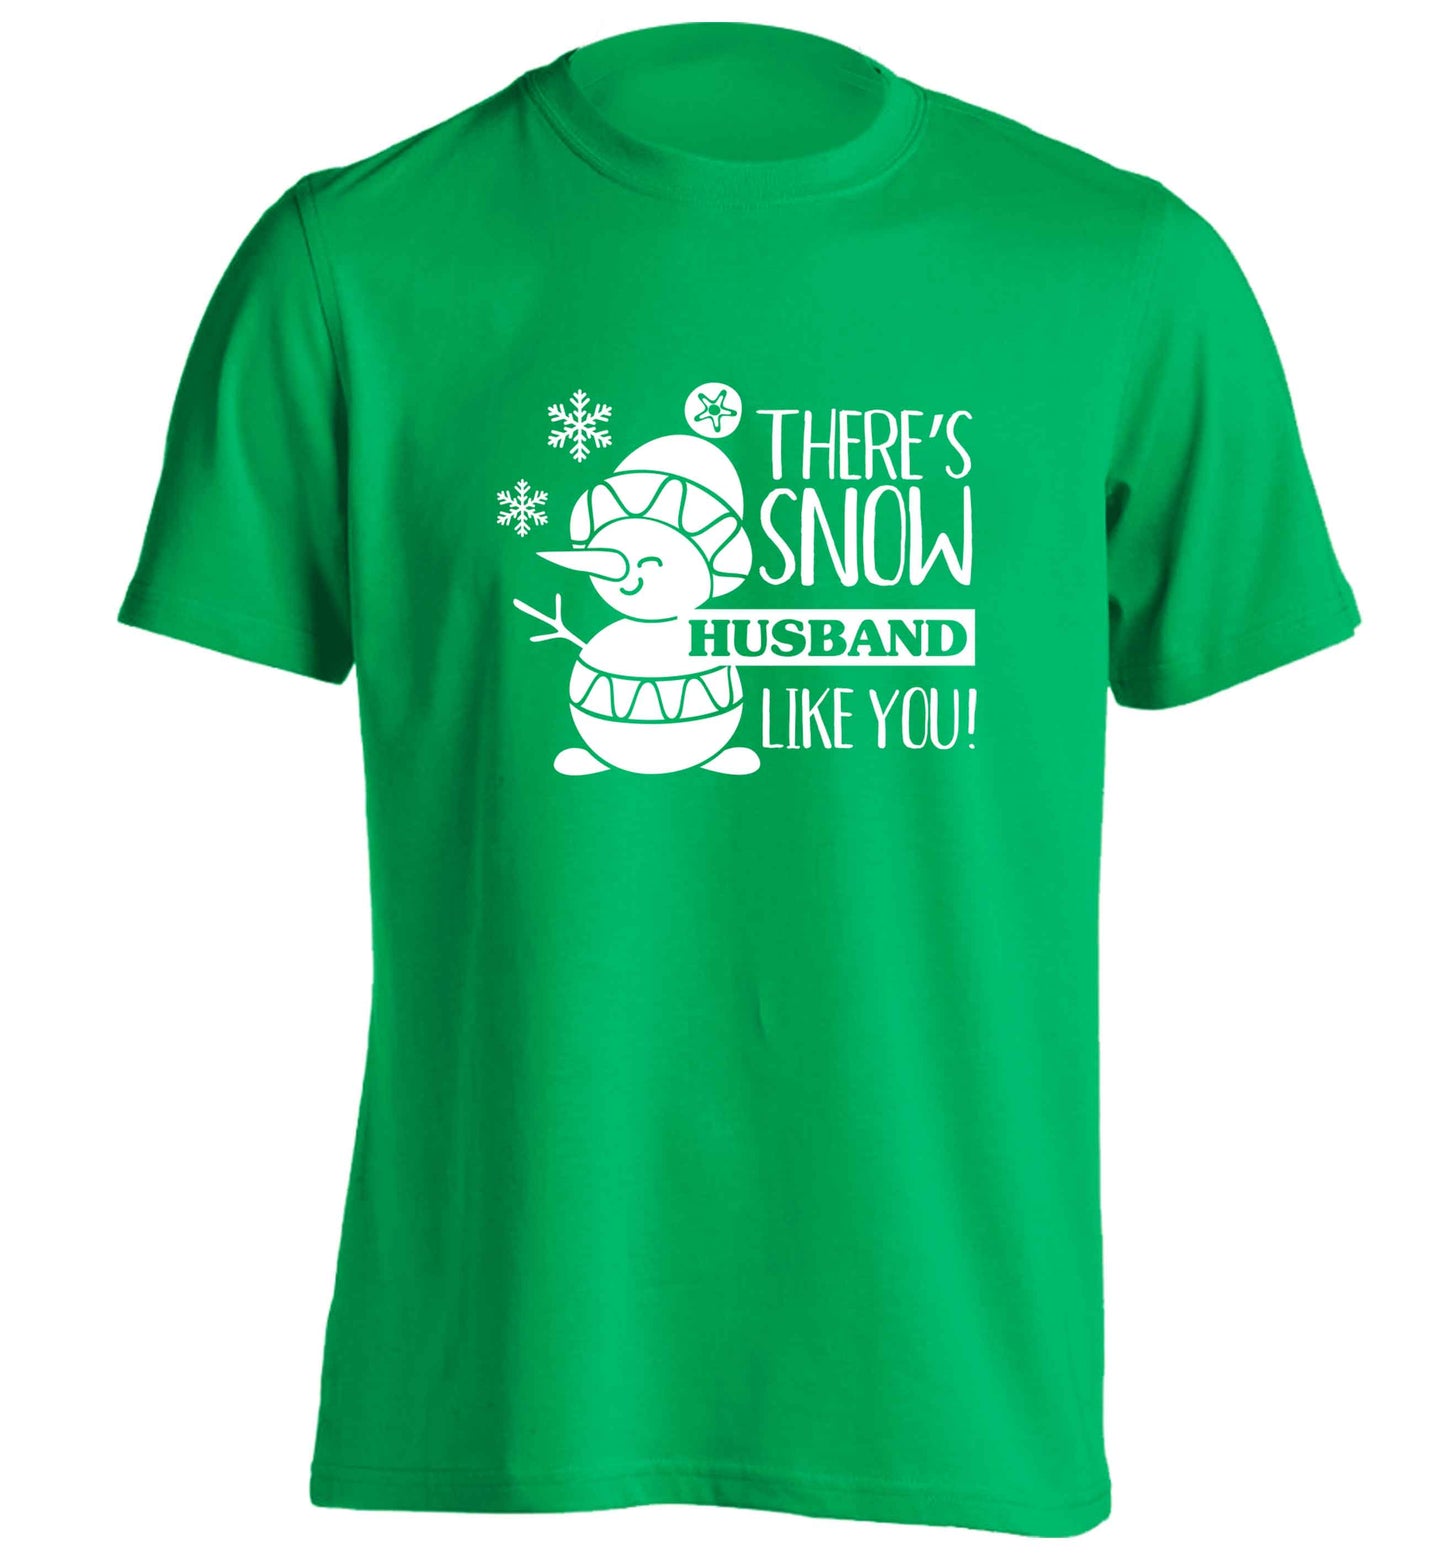 There's snow husband like you adults unisex green Tshirt 2XL